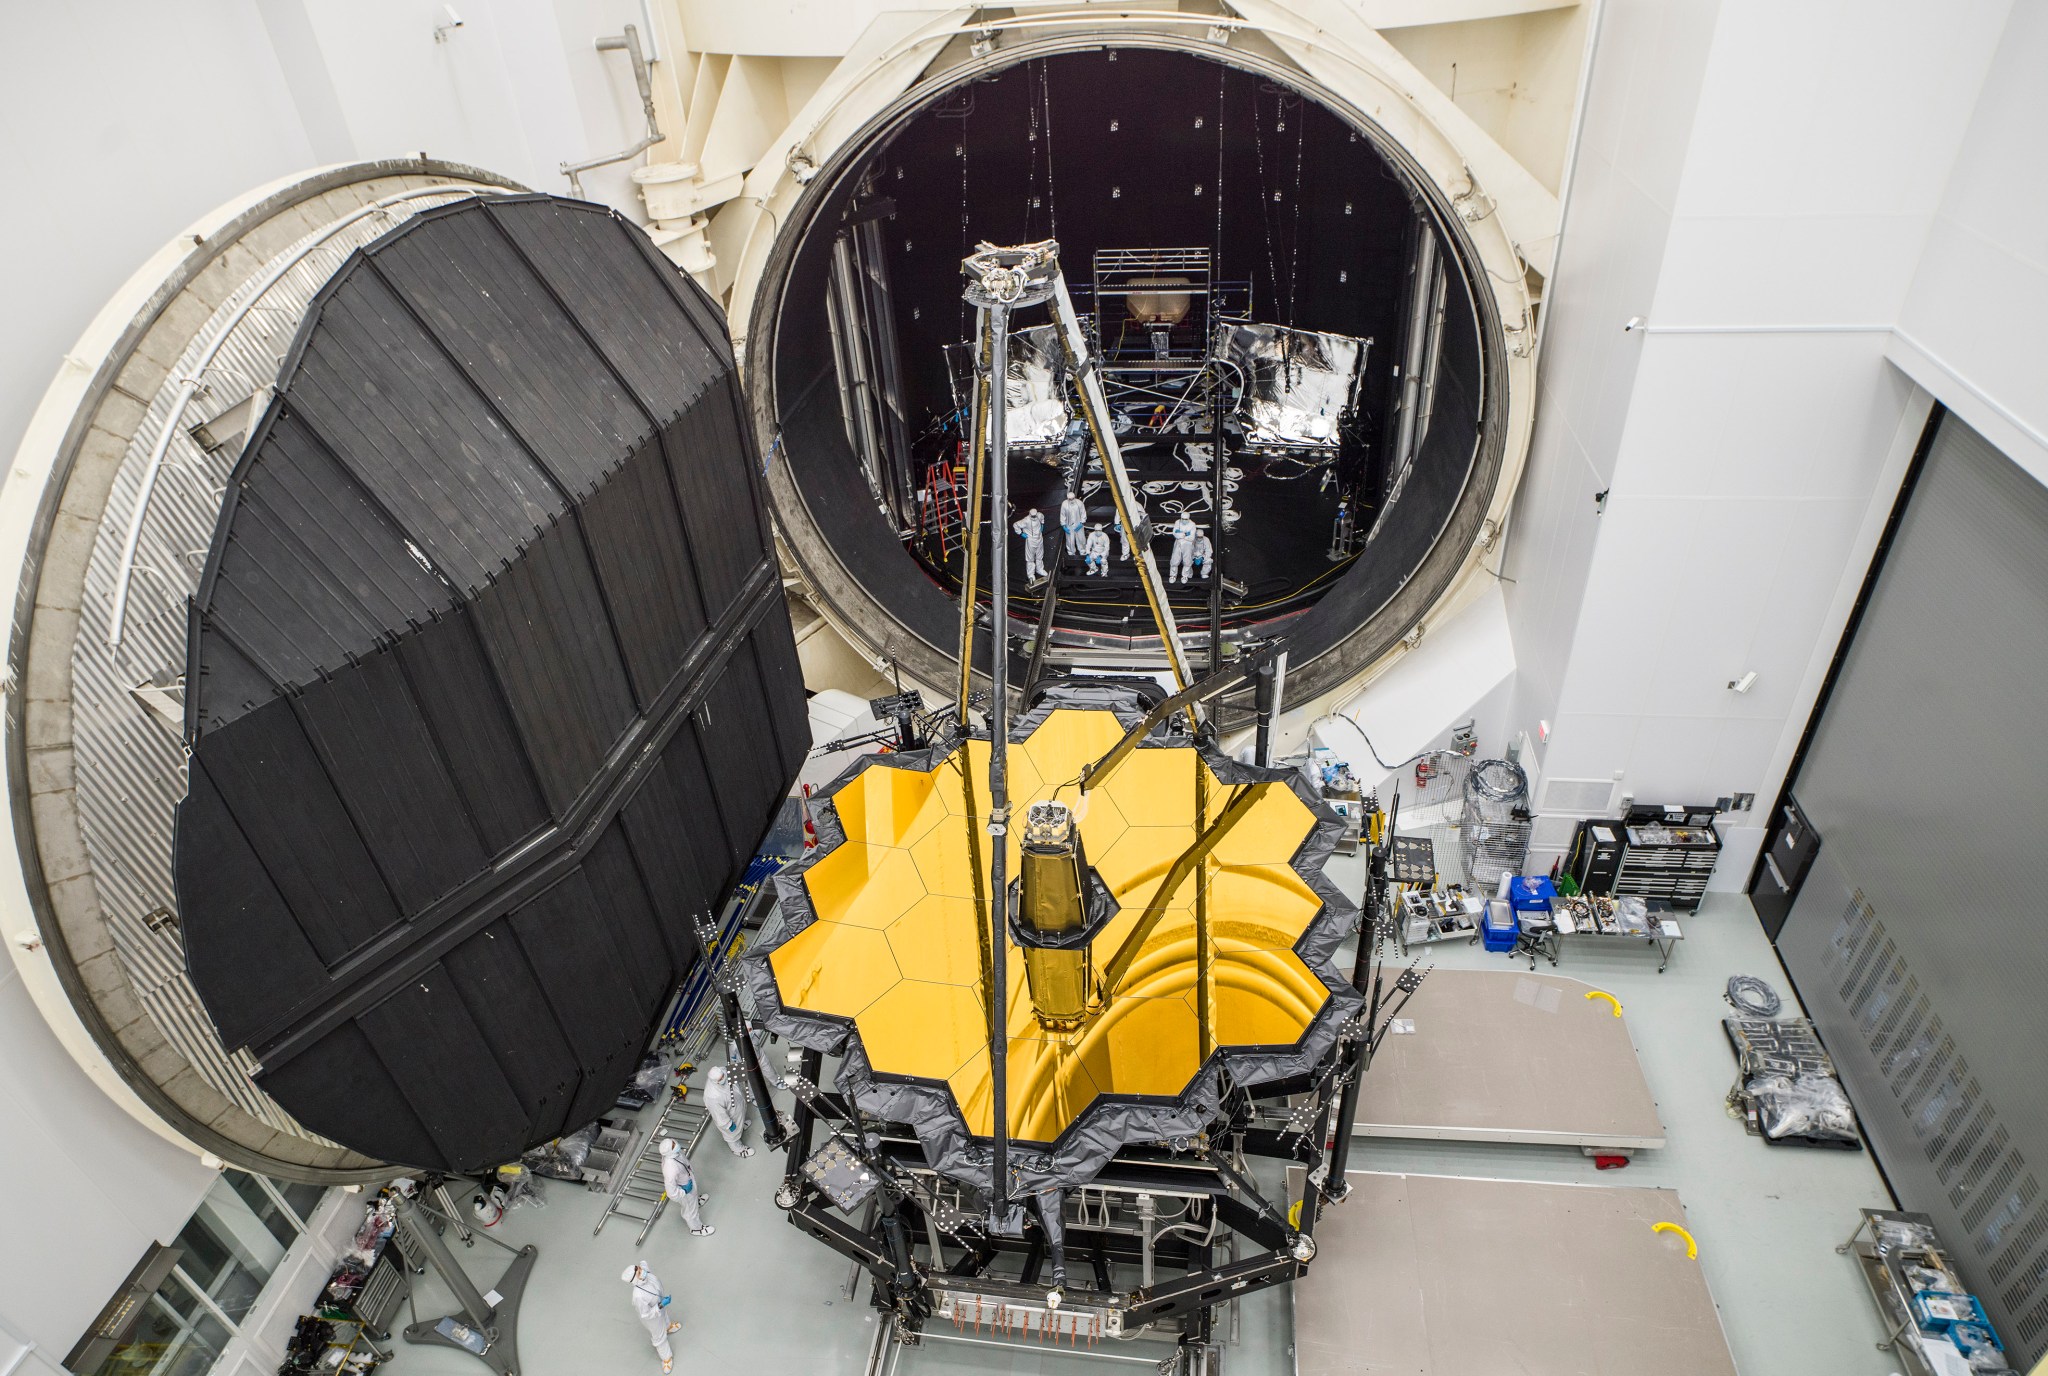 Aerial view of NASA’s James Webb Space Telescope emerging from Chamber A at NASA’s Johnson Space Center in Houston on Dec. 1, 2017 after cryogenic testing